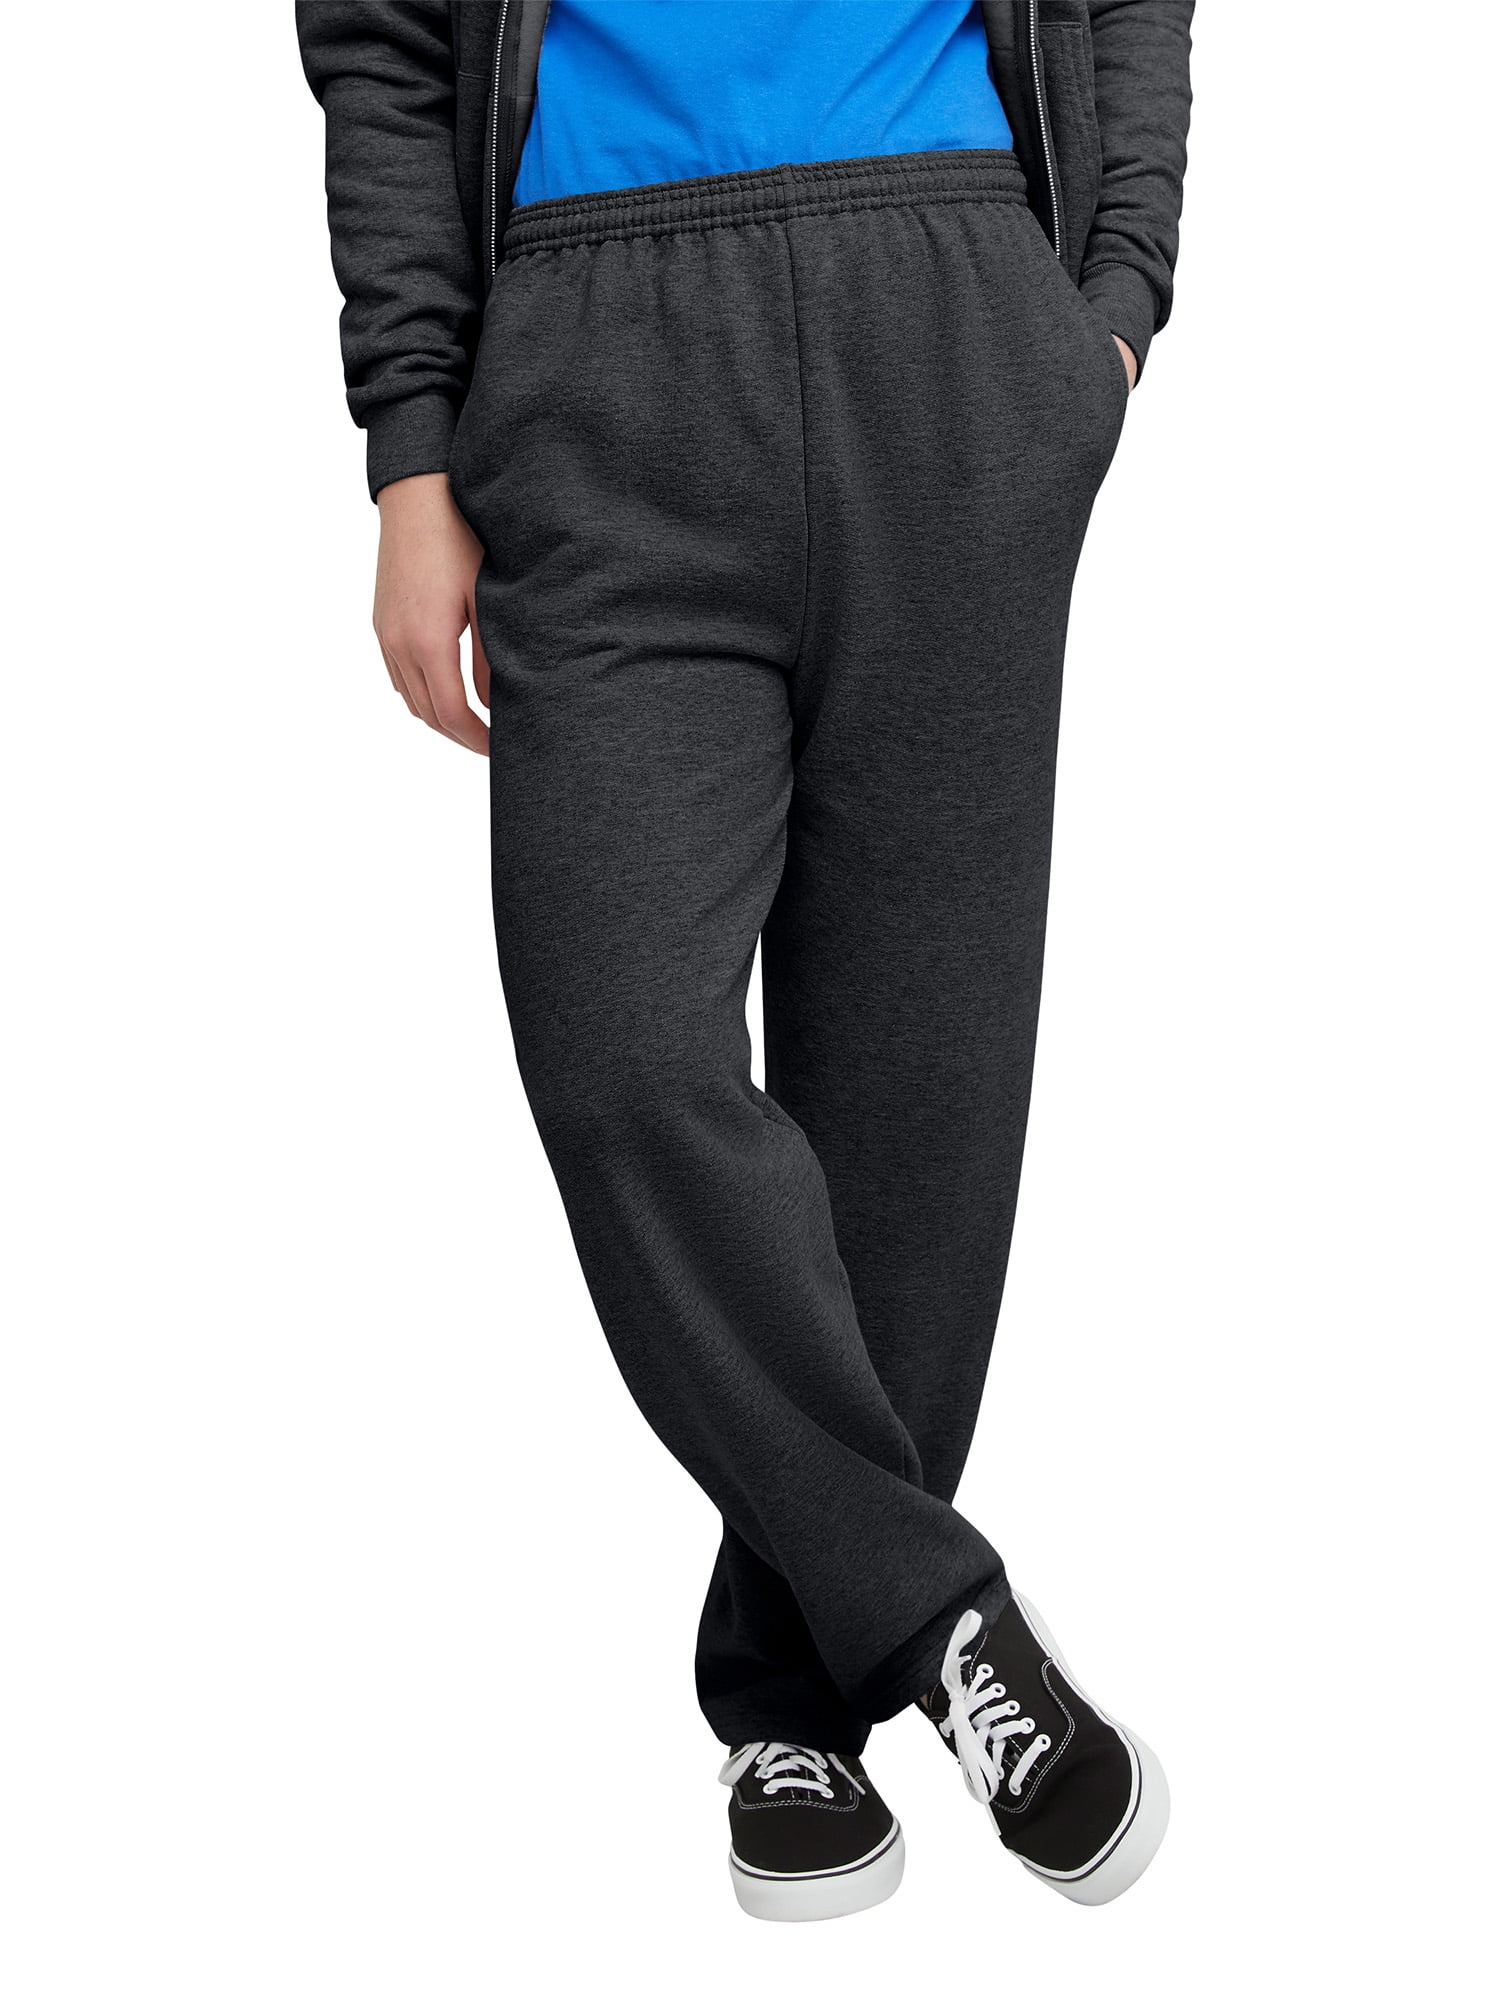  Hanes Men's EcoSmart Non-Pocket Sweatpant, Black - 1 Pack,  Small : Clothing, Shoes & Jewelry